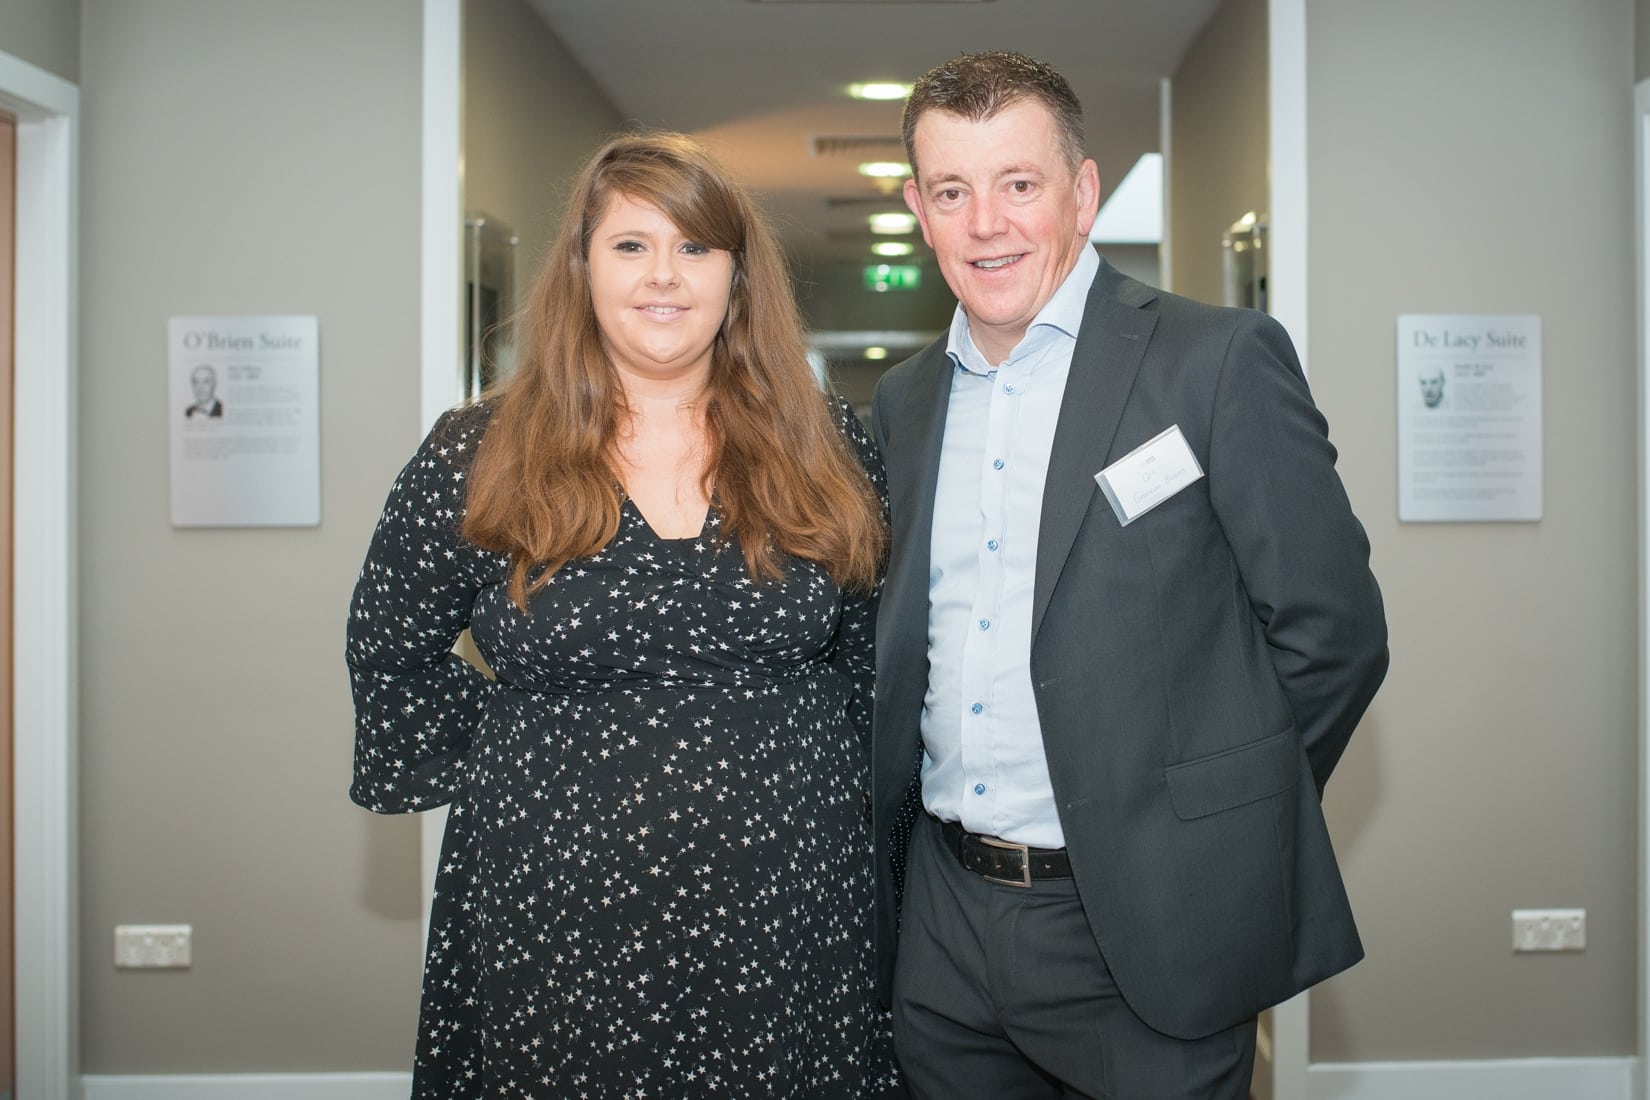 No repro fee-Business Excellence Seminar: Wealth Management. Event sponsored by AIB- 11-09-2018, From Left to Right: Caoimhe Moloney - Limerick Chamber, Graham Burns - CPL. 
Photo credit Shauna Kennedy